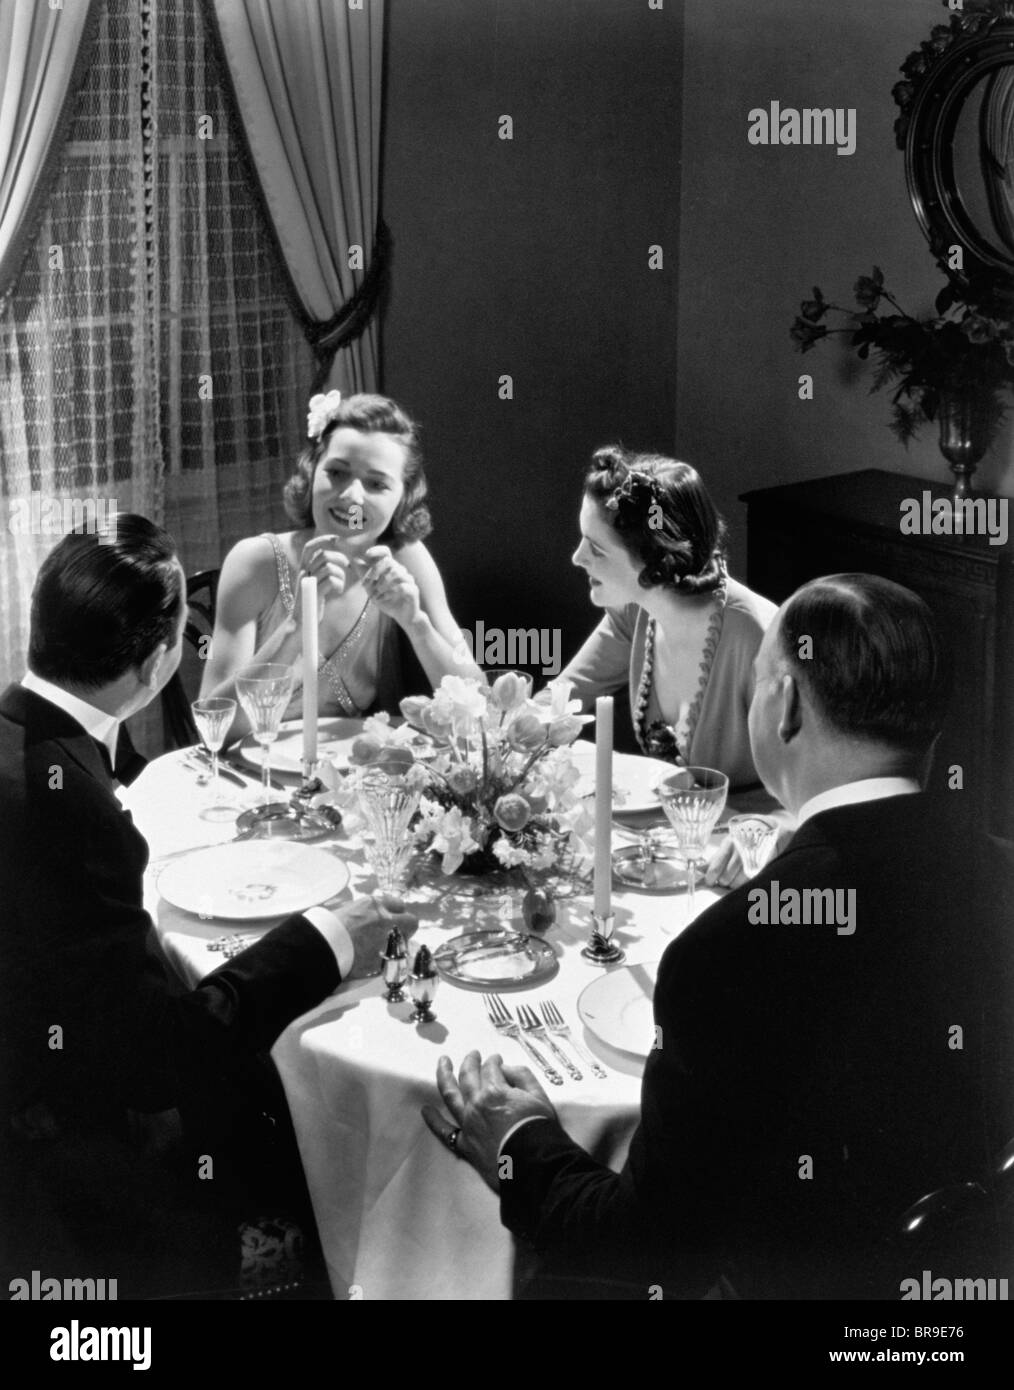 1930s TWO COUPLES FORMAL DINNER PARTY SITTING AT TABLE Stock Photo